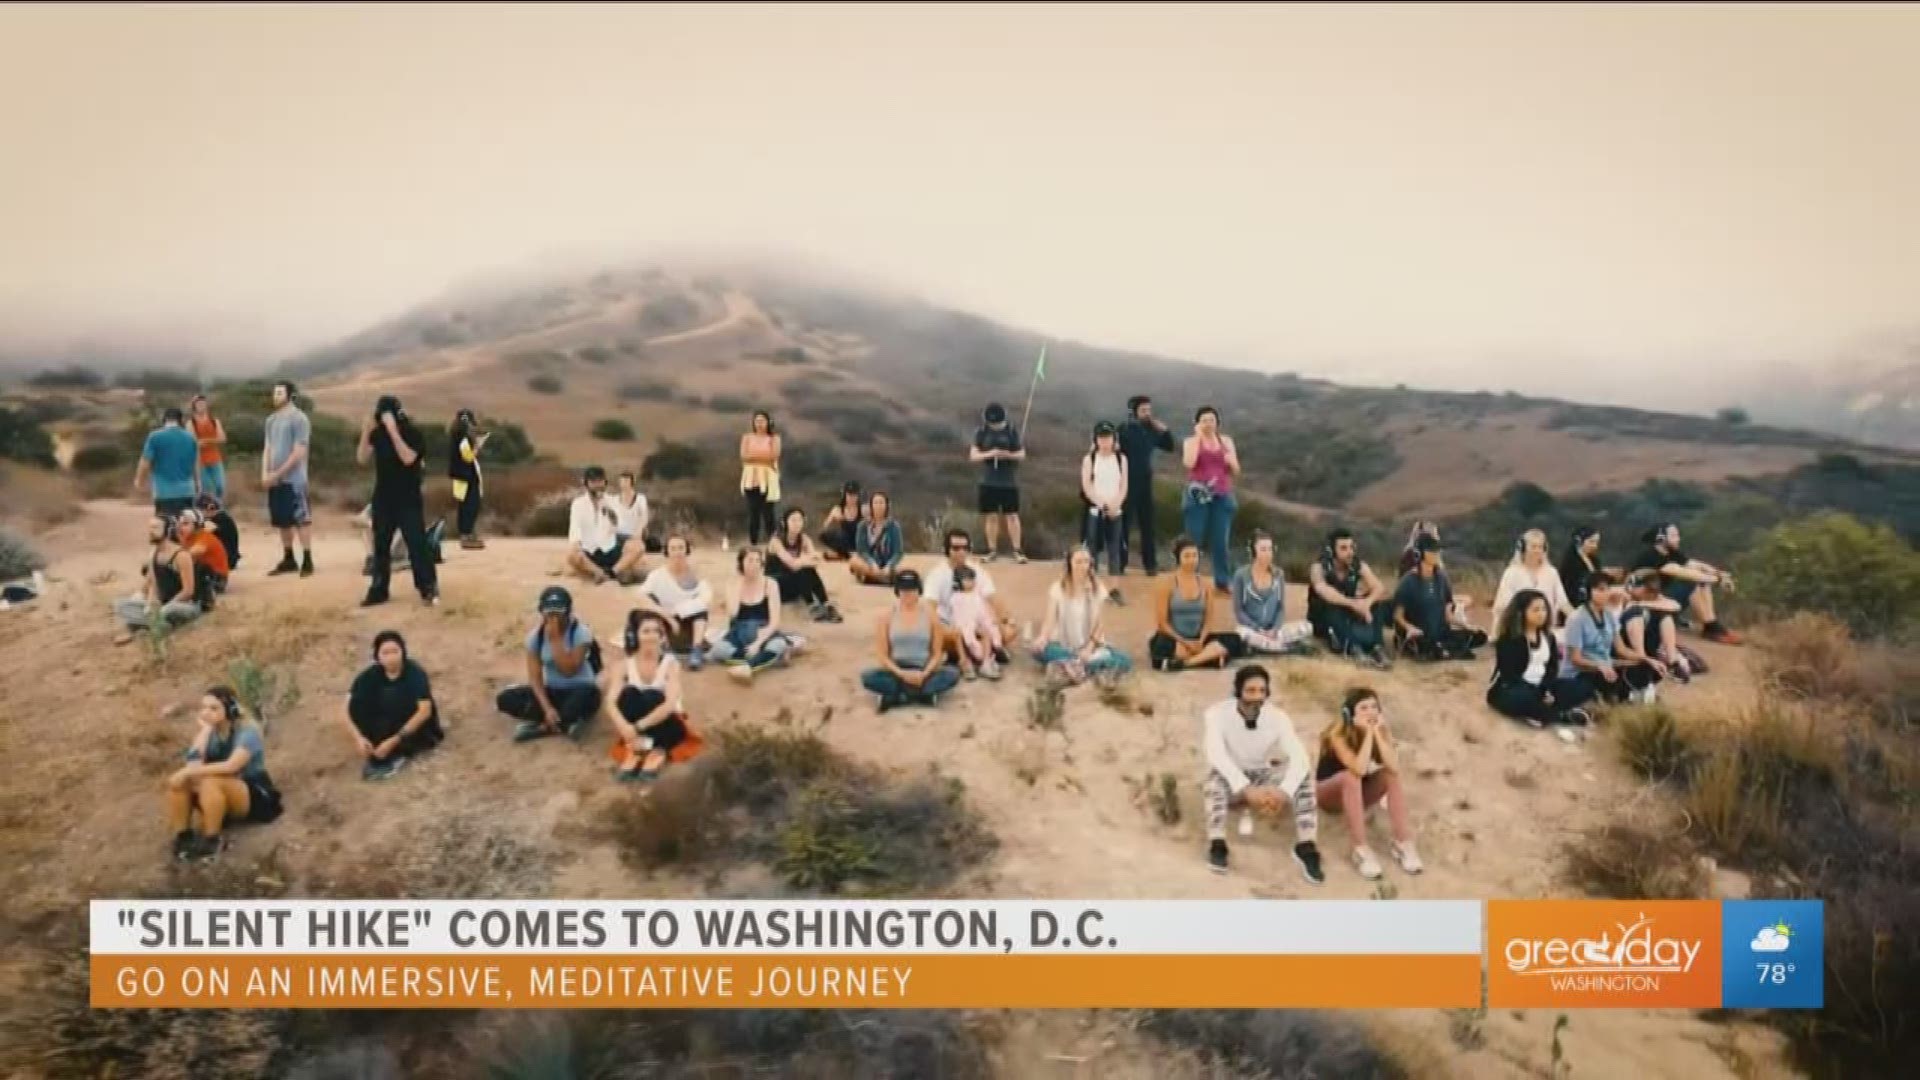 'Silent Hike' comes to Washington, D.C. and Murray Hidary, founder of 'Silent Hike', shares the motivation behind creating a meditative movement experience across the country.